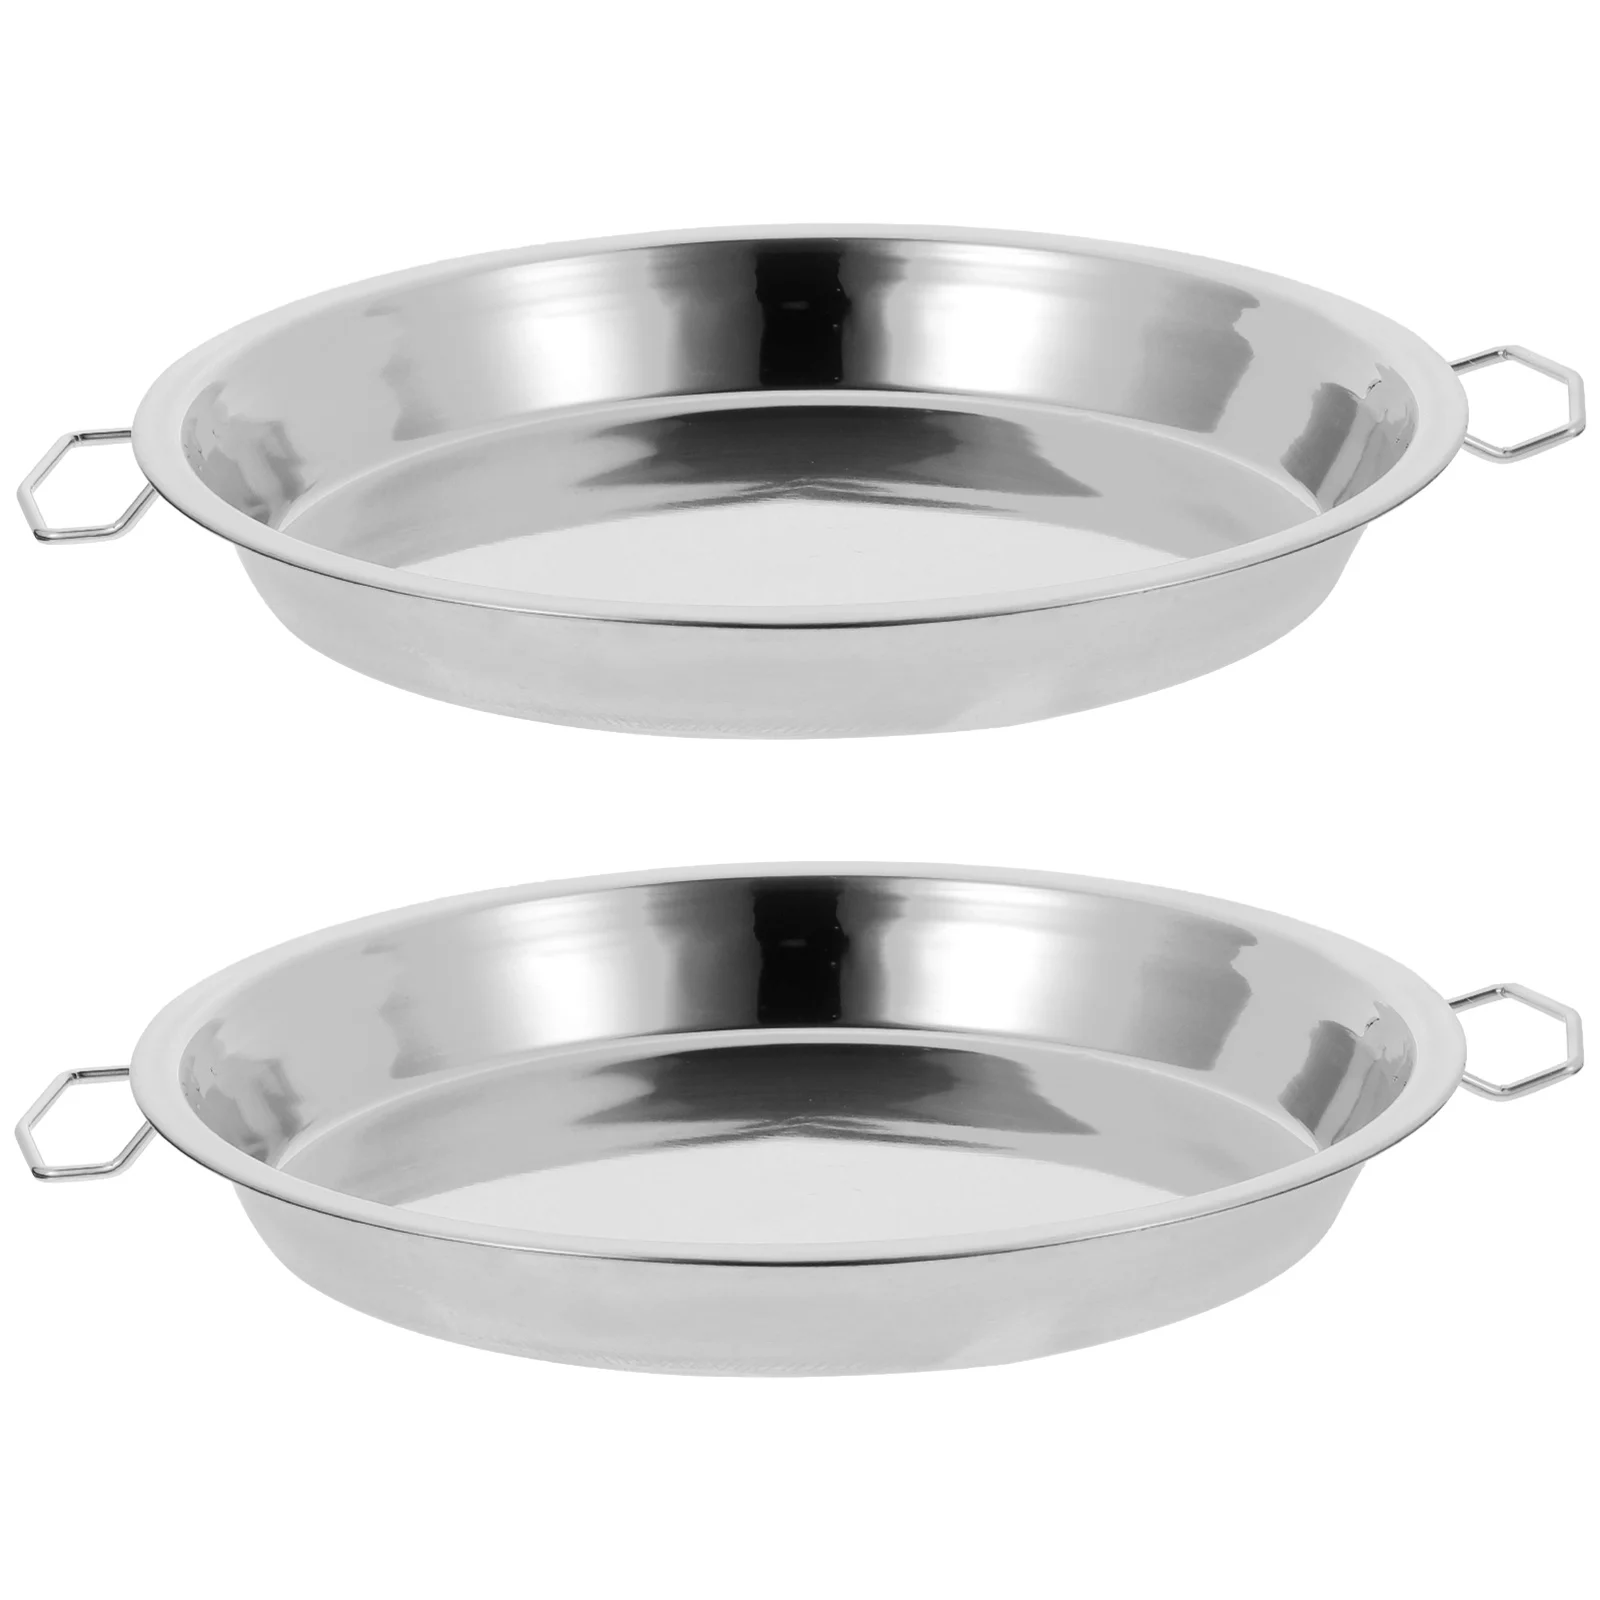 

2 Pcs Plate Round Baking Pan Stainless Steel Cooking Utensil Cold Noodle Pastry Dish Steamed Rice